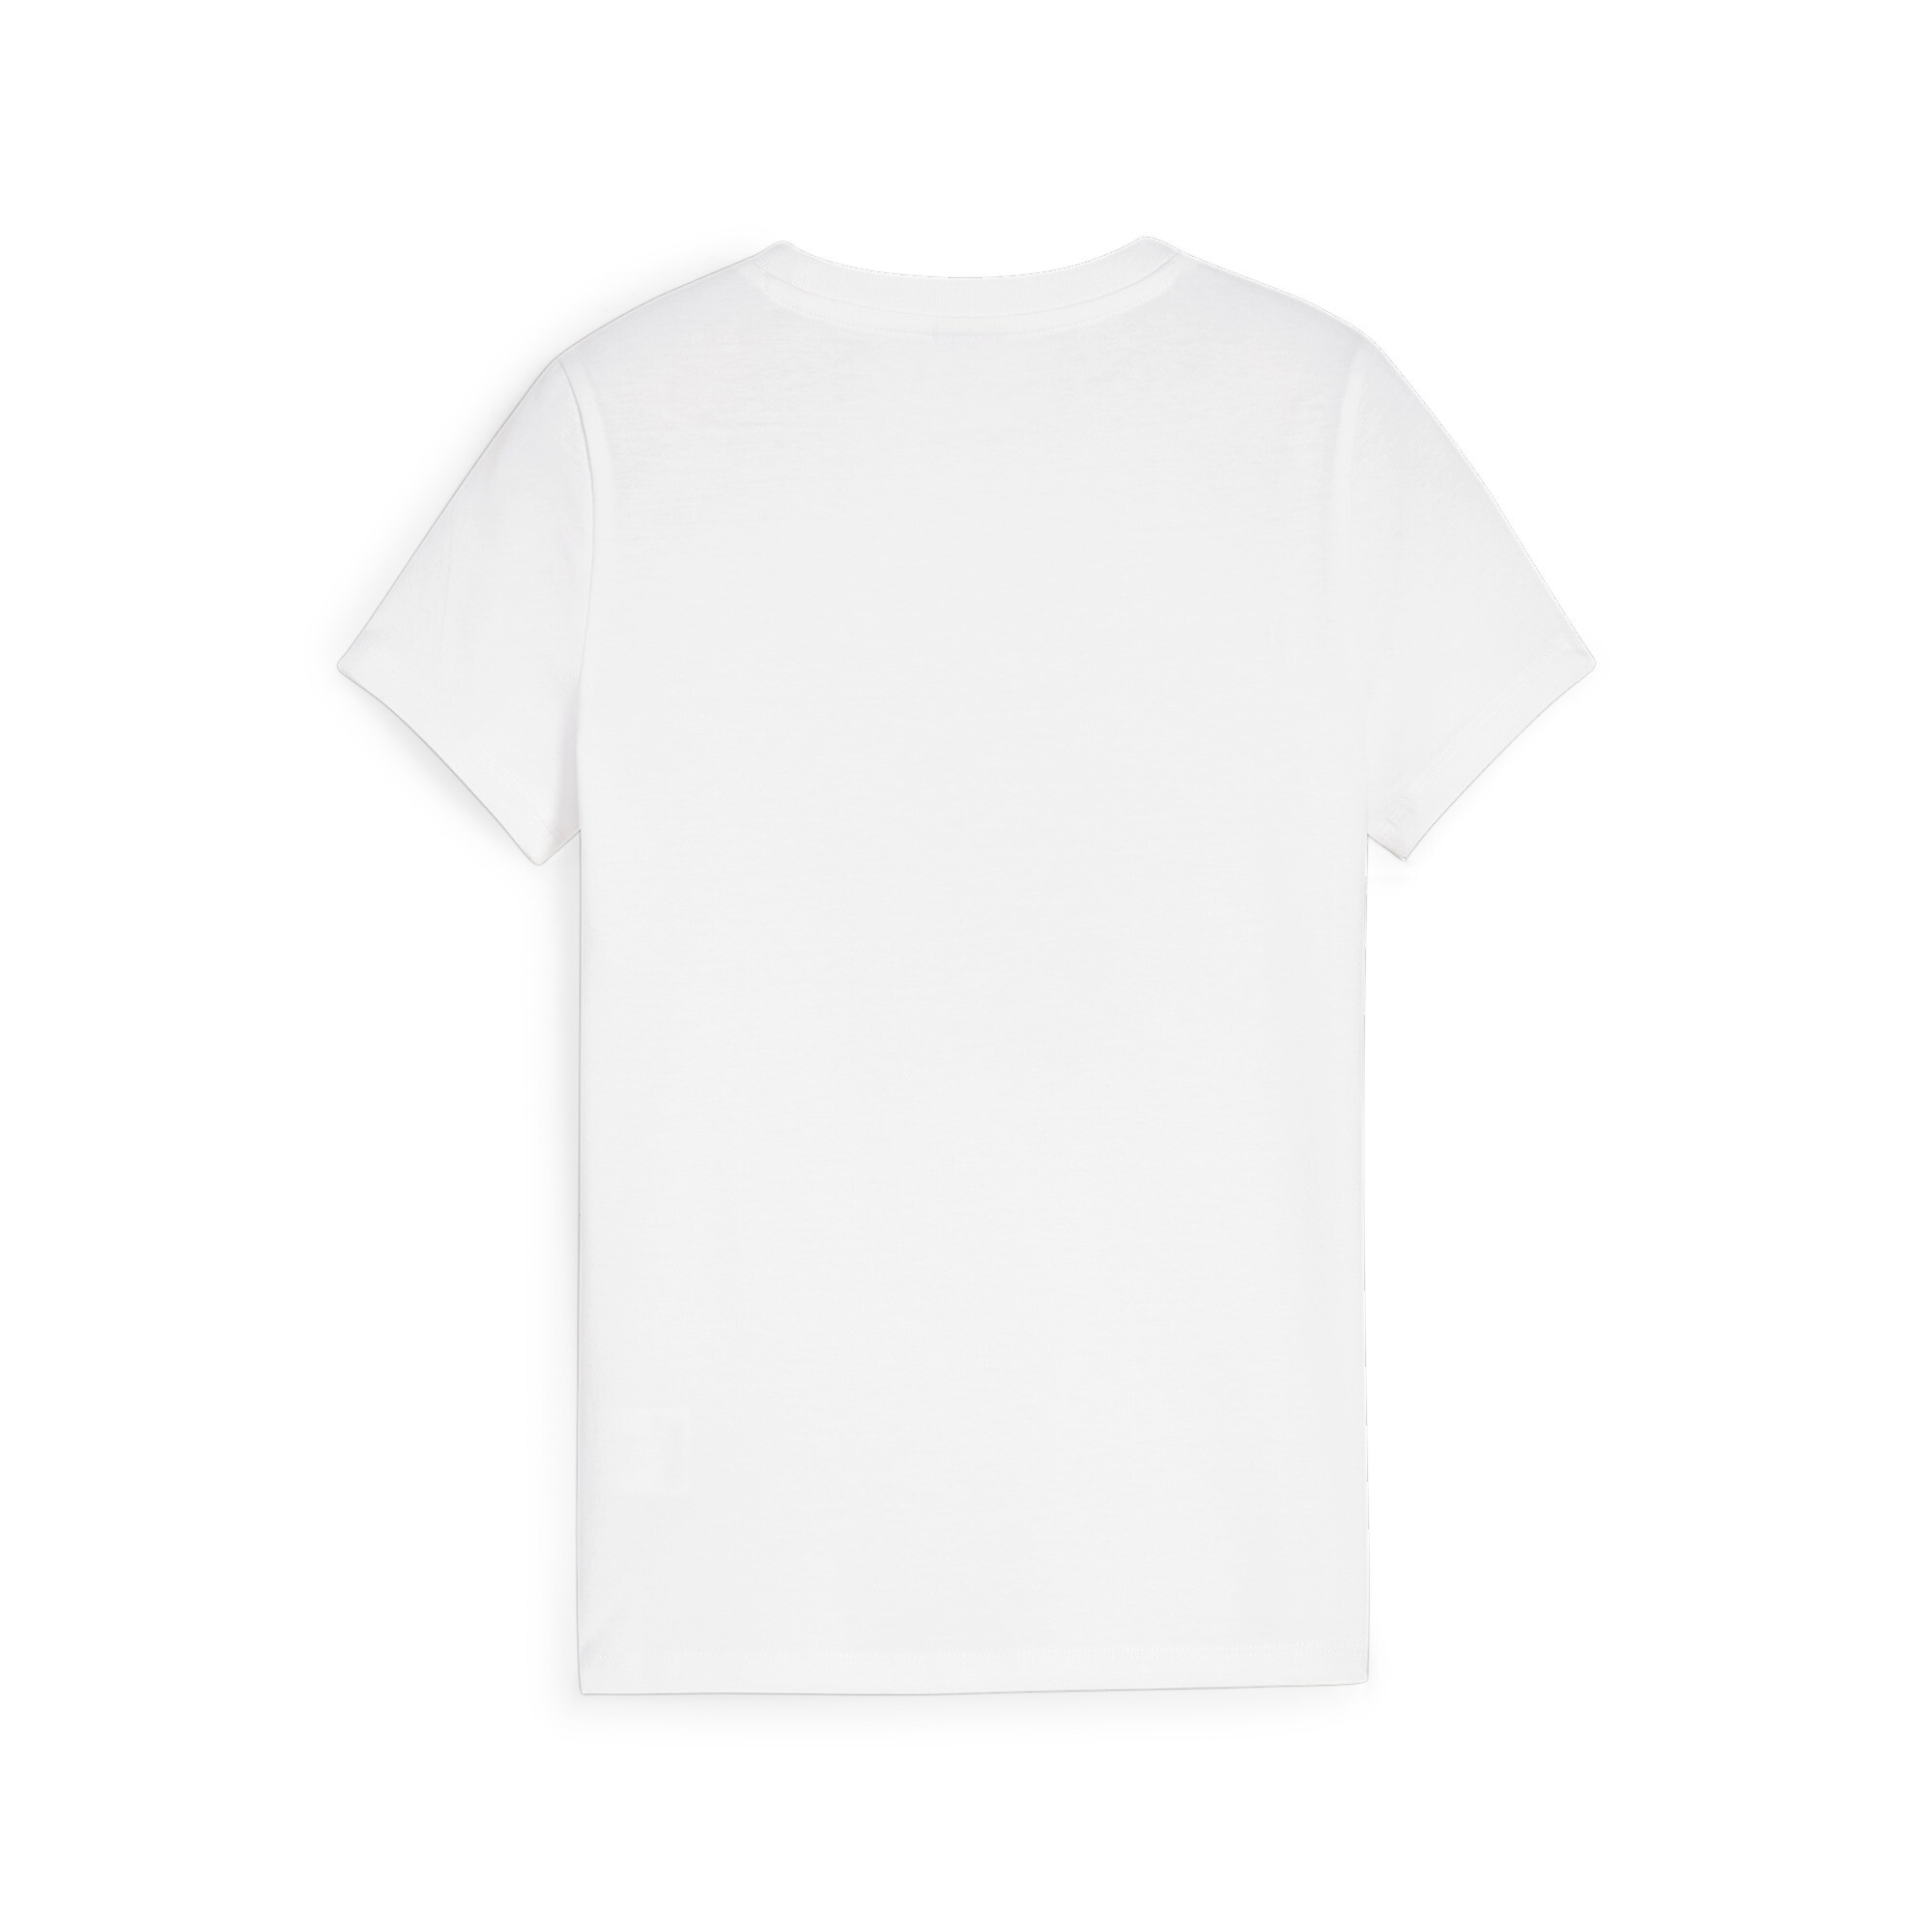 PUMA GRAPHICS MTCH PNT T-Shirt In White, Size 15-16 Youth